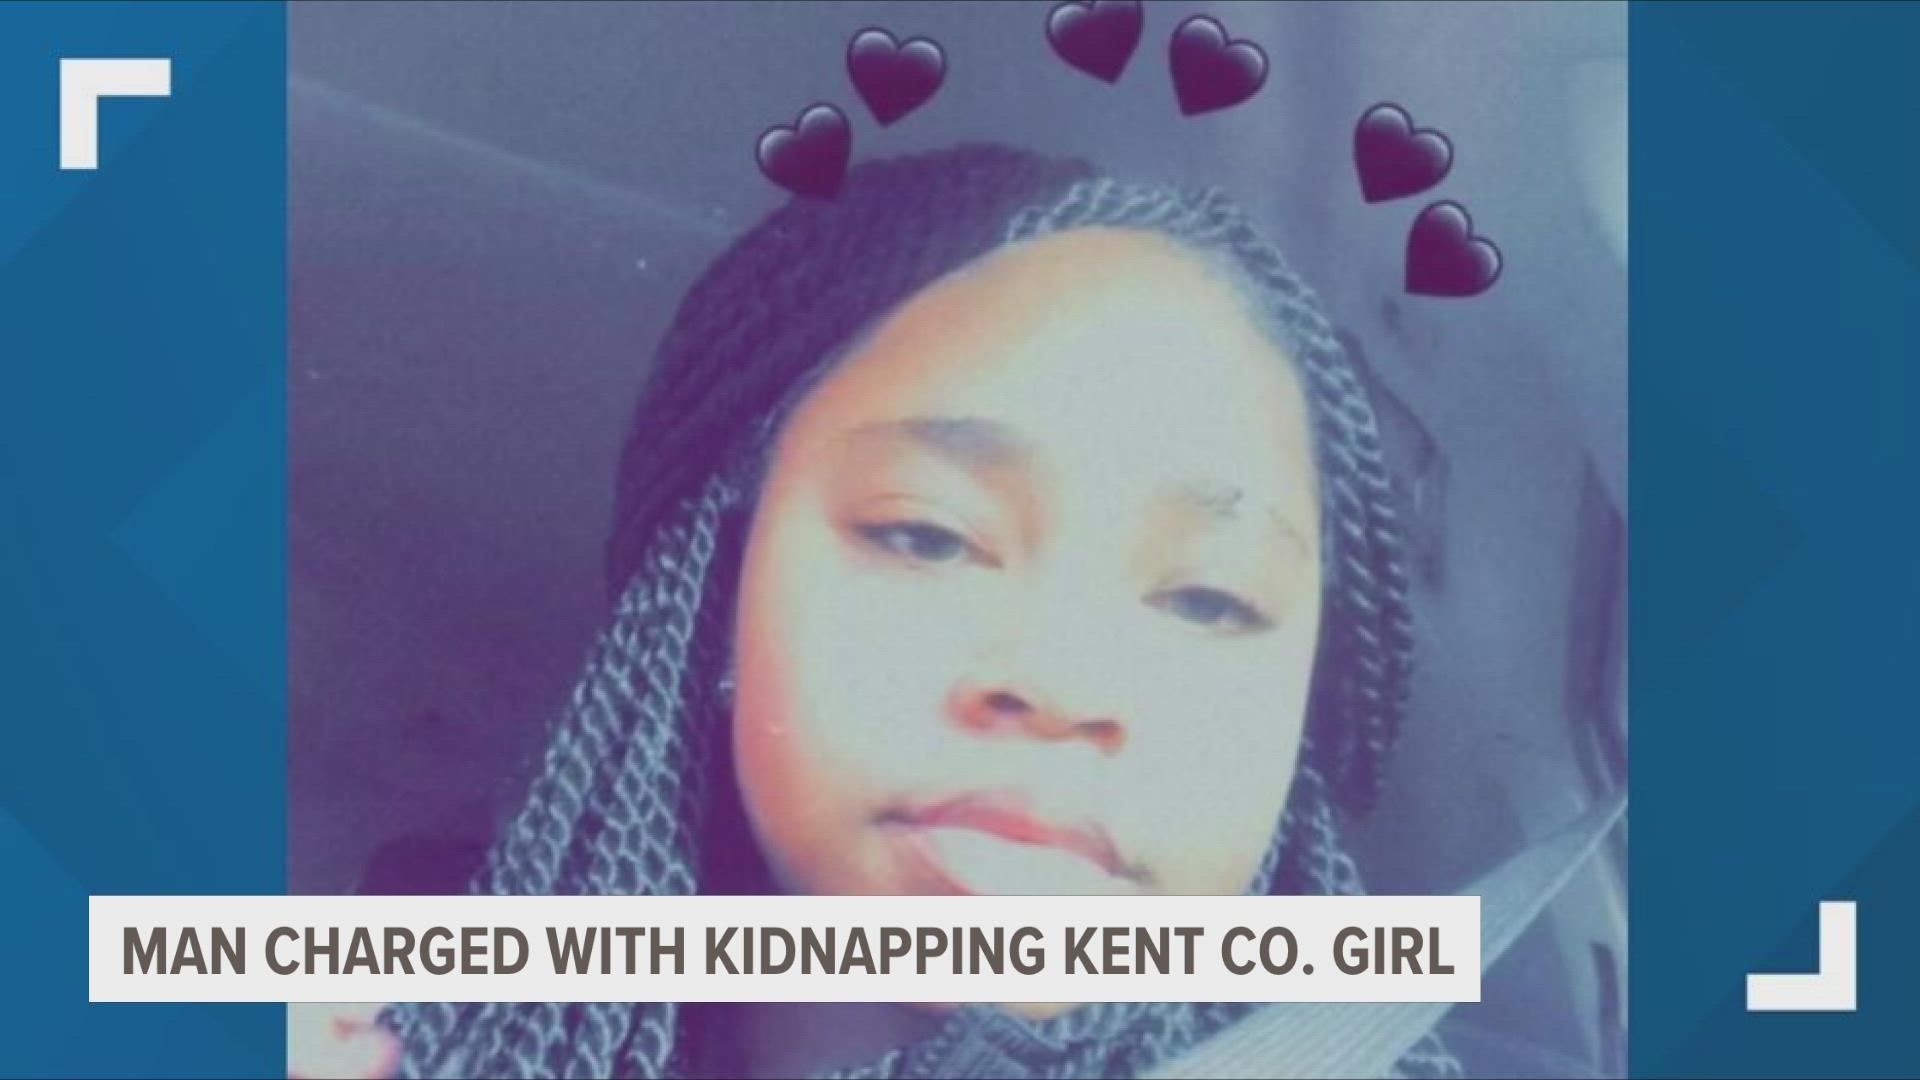 The 19-year-old man caught traveling with the girl is now facing kidnapping charges in Michigan.